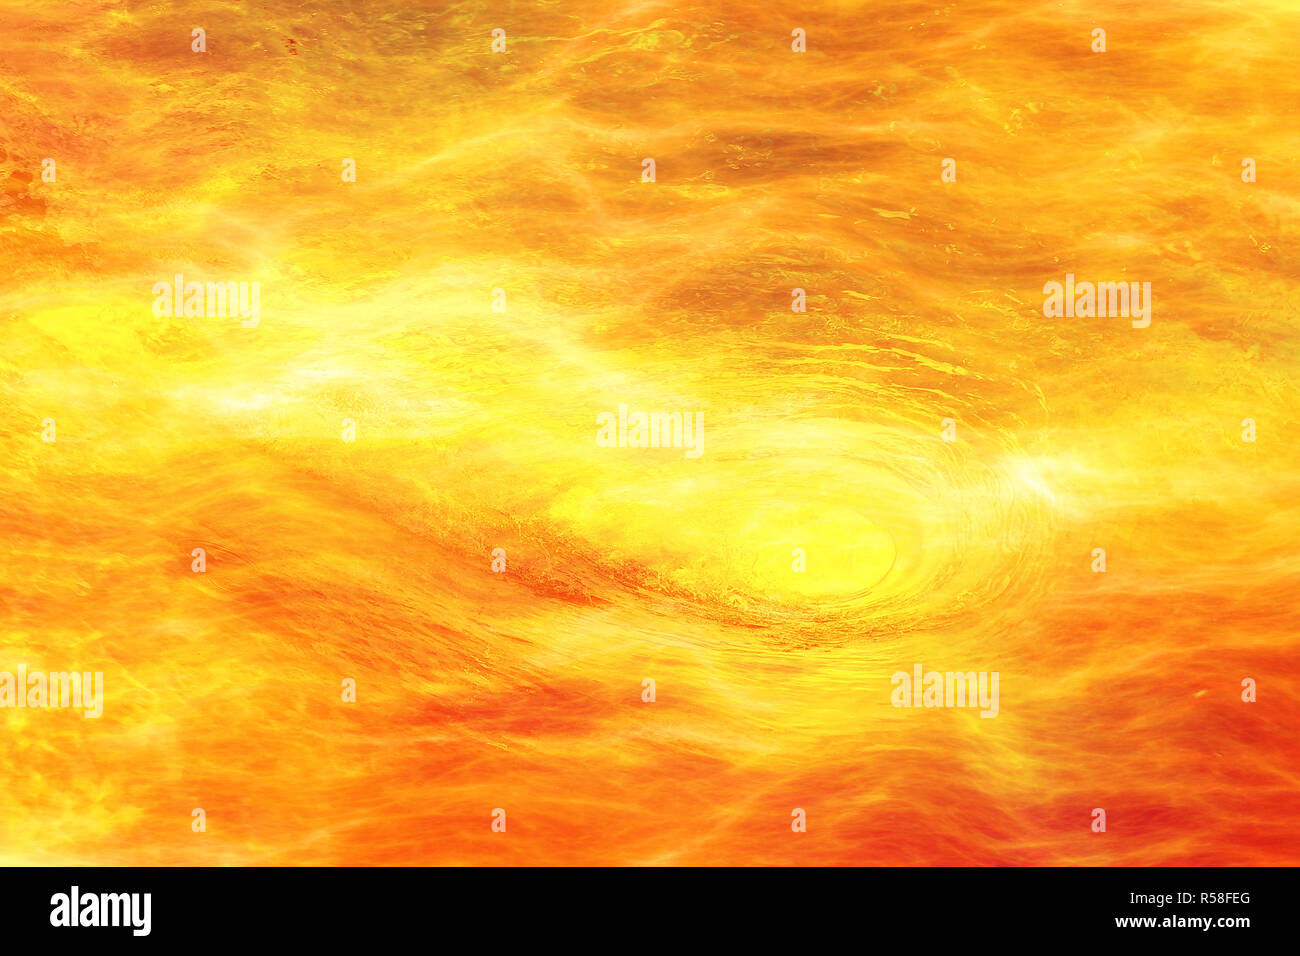 fire circles or whirlpools,concepts for infinity Stock Photo